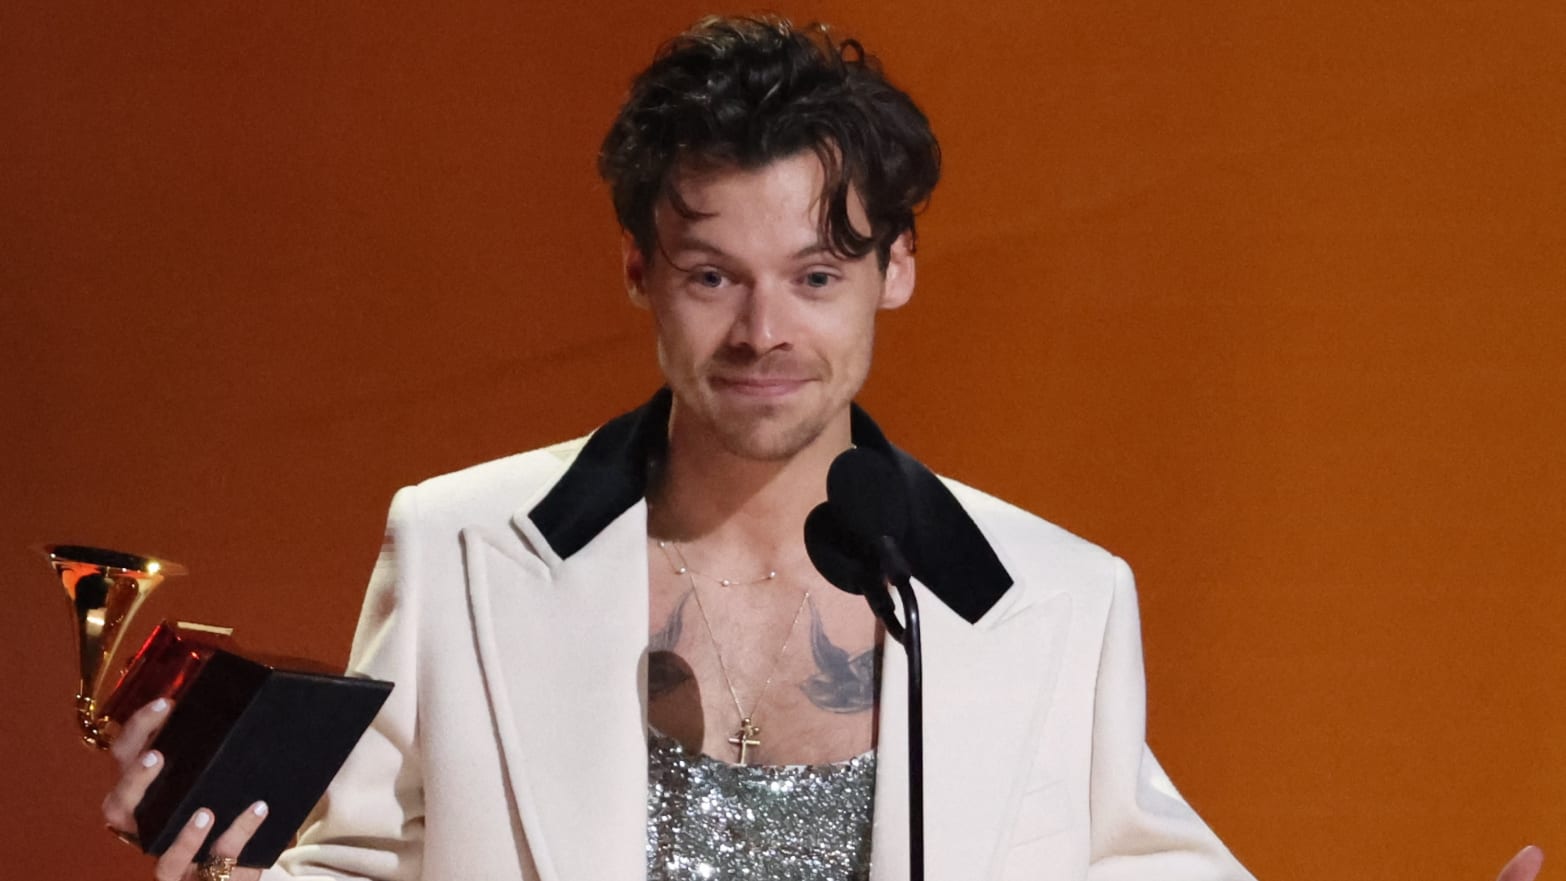 How Did Harry Styles Win the Album of the Year Grammy Over Beyoncé?